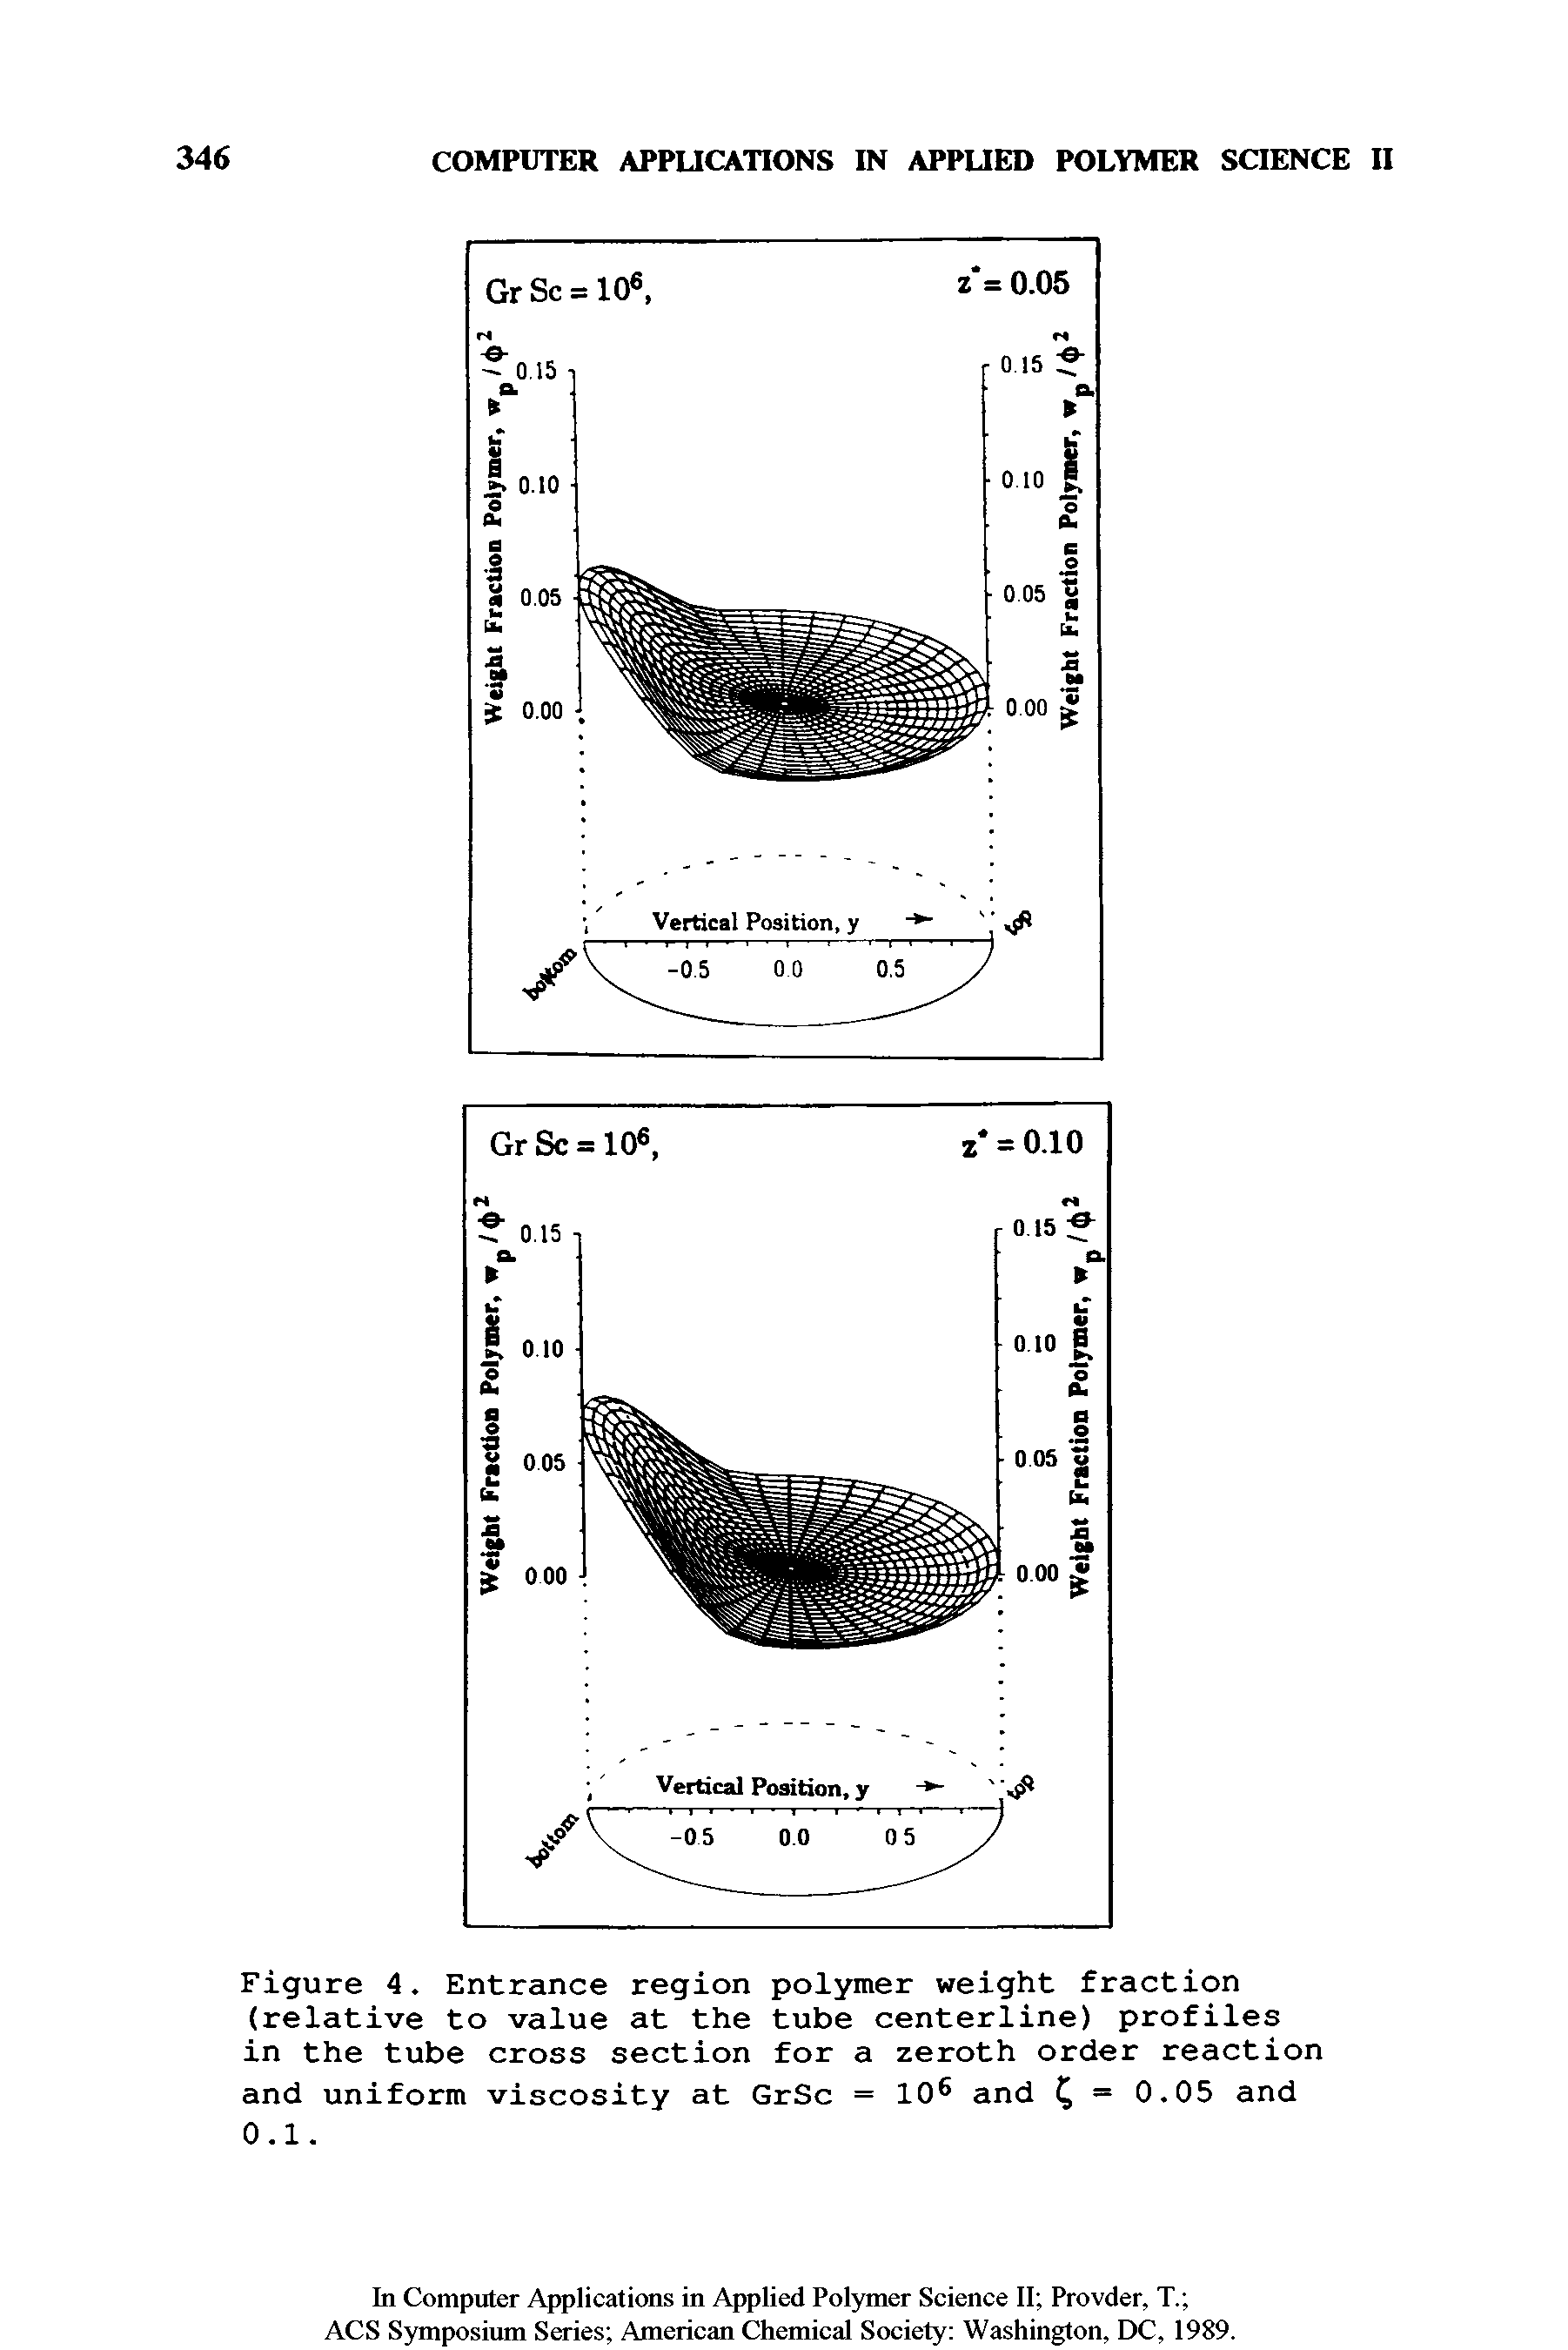 Figure 4. Entrance region polymer weight fraction (relative to value at the tube centerline) profiles in the tube cross section for a zeroth order reaction and uniform viscosity at GrSc = 10 and = 0.05 and 0.1.